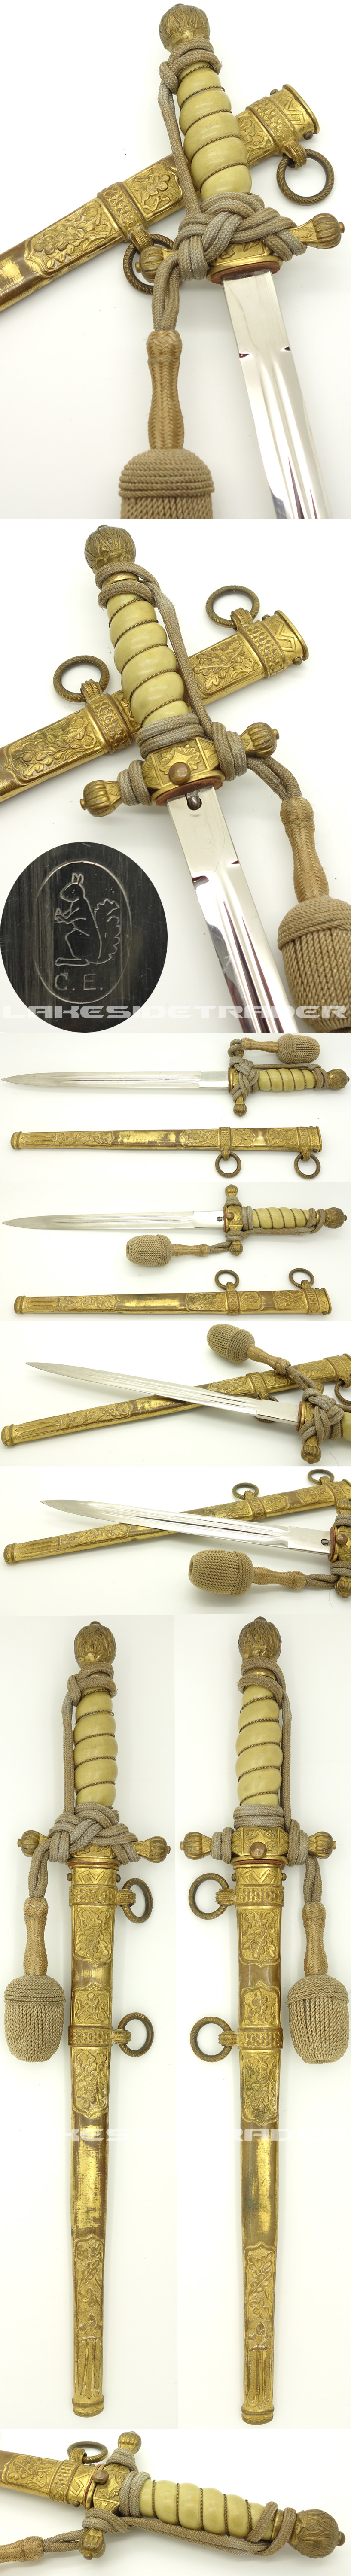 1st Model Navy Dagger by Eickhorn with Hand-chased Scabbard